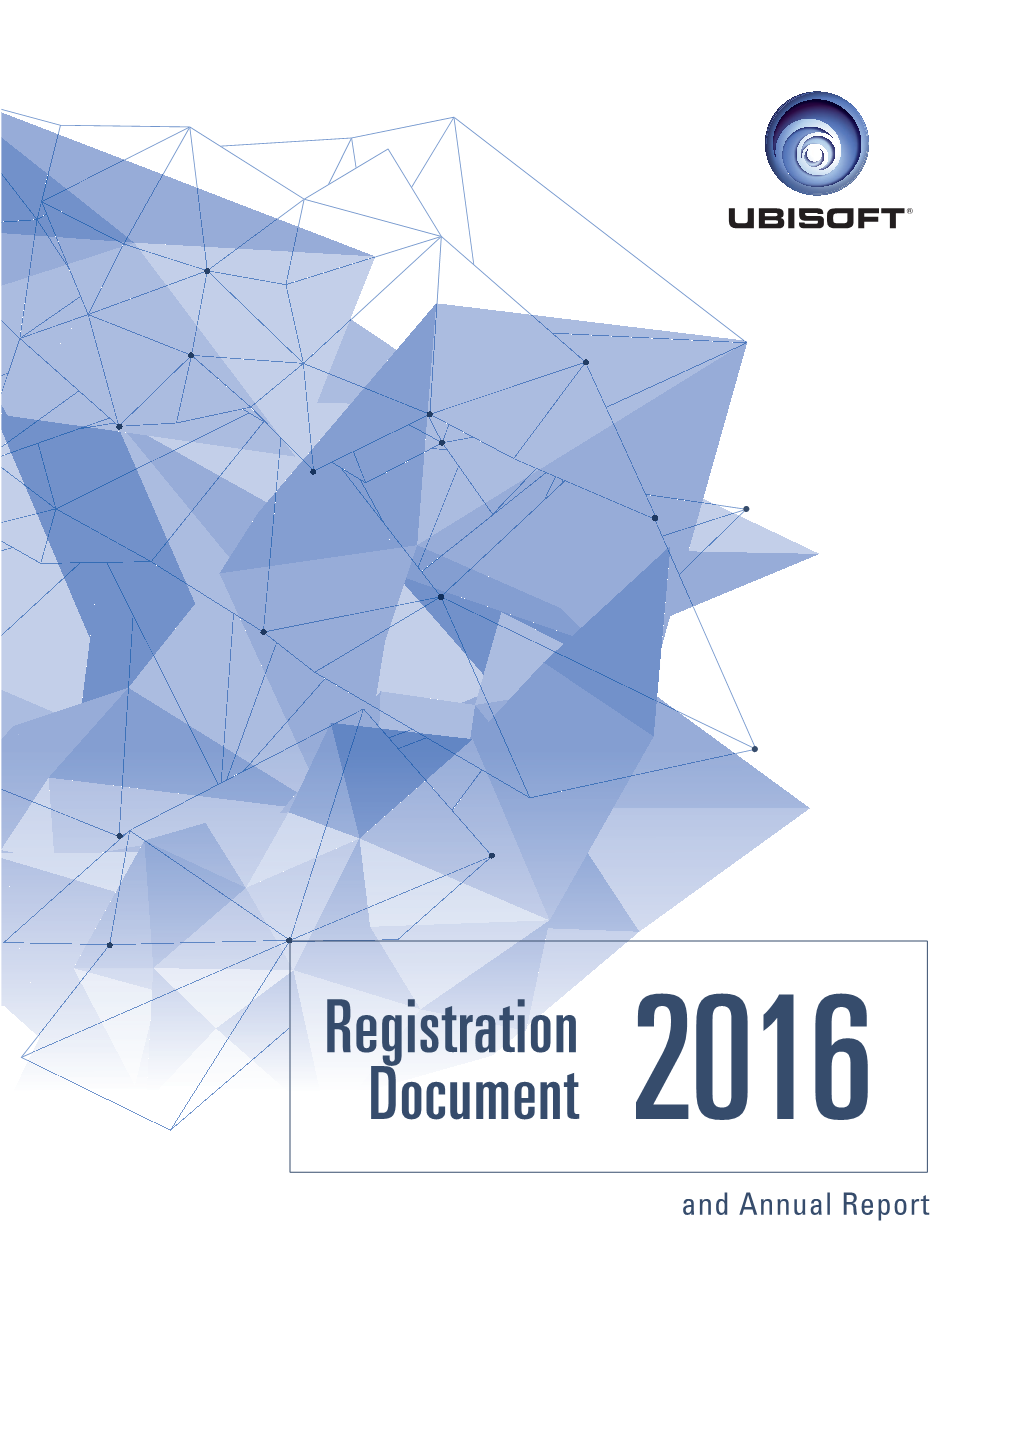 Registration Document 2016 and Annual Report Contents